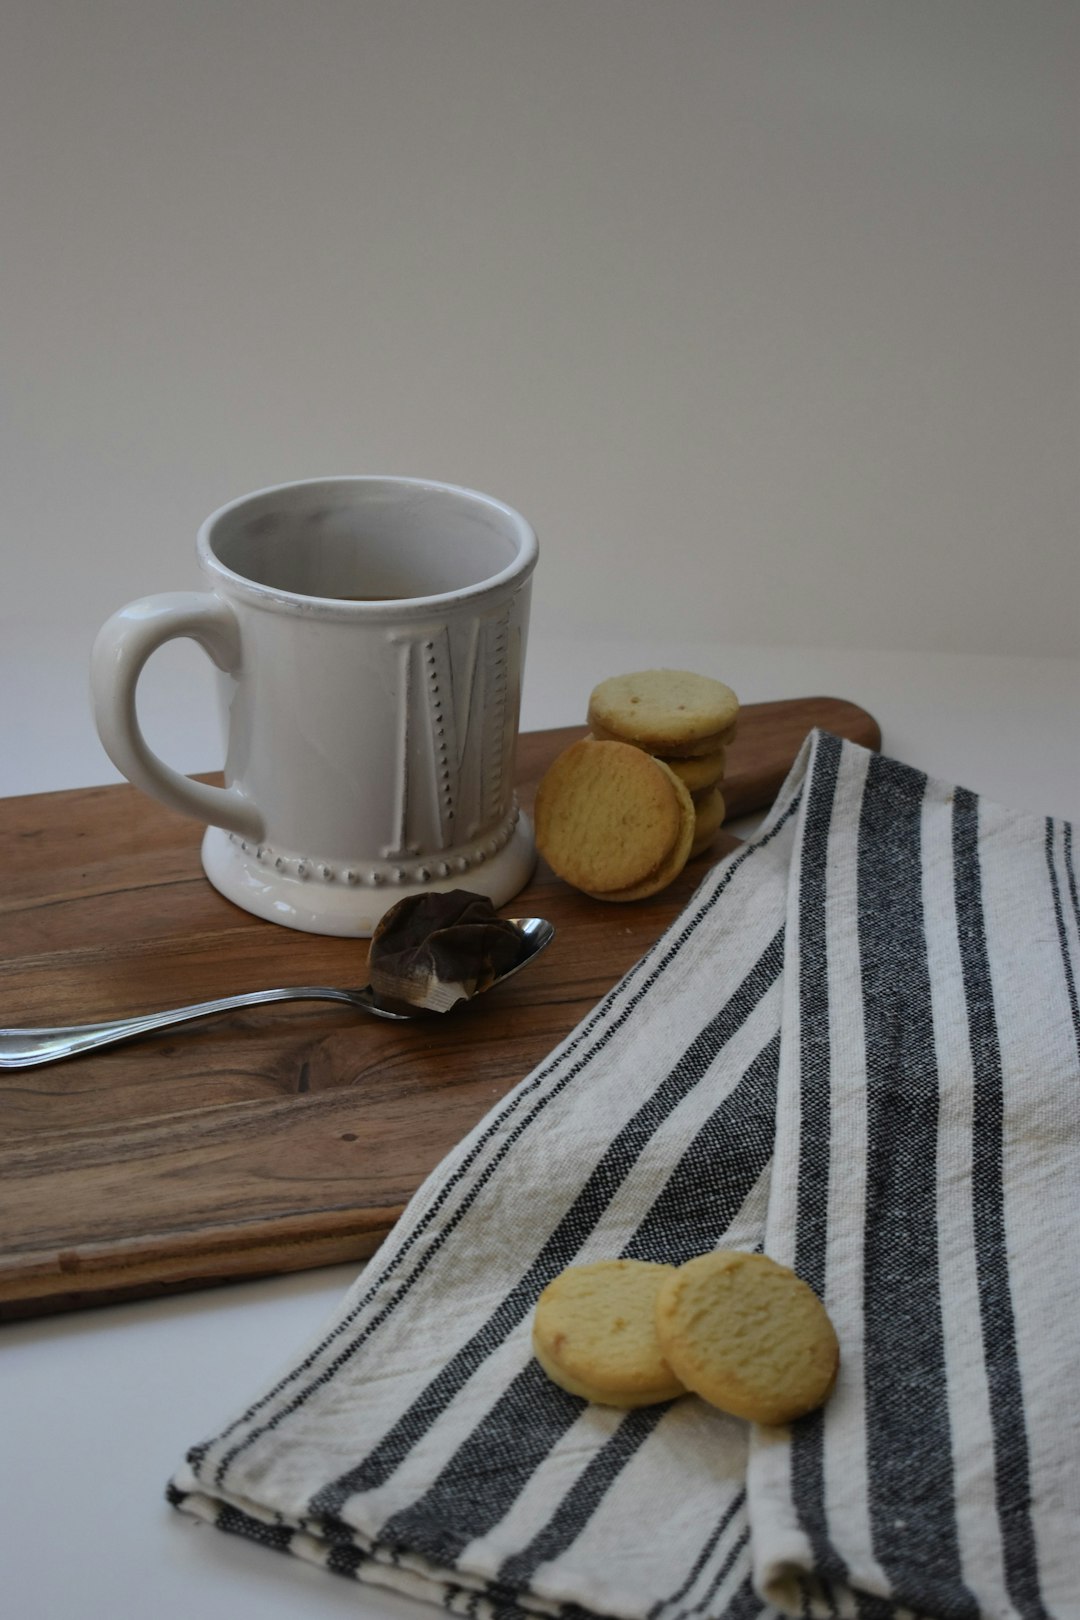 white and black checkered ceramic mug beside stainless steel spoon on brown wooden table